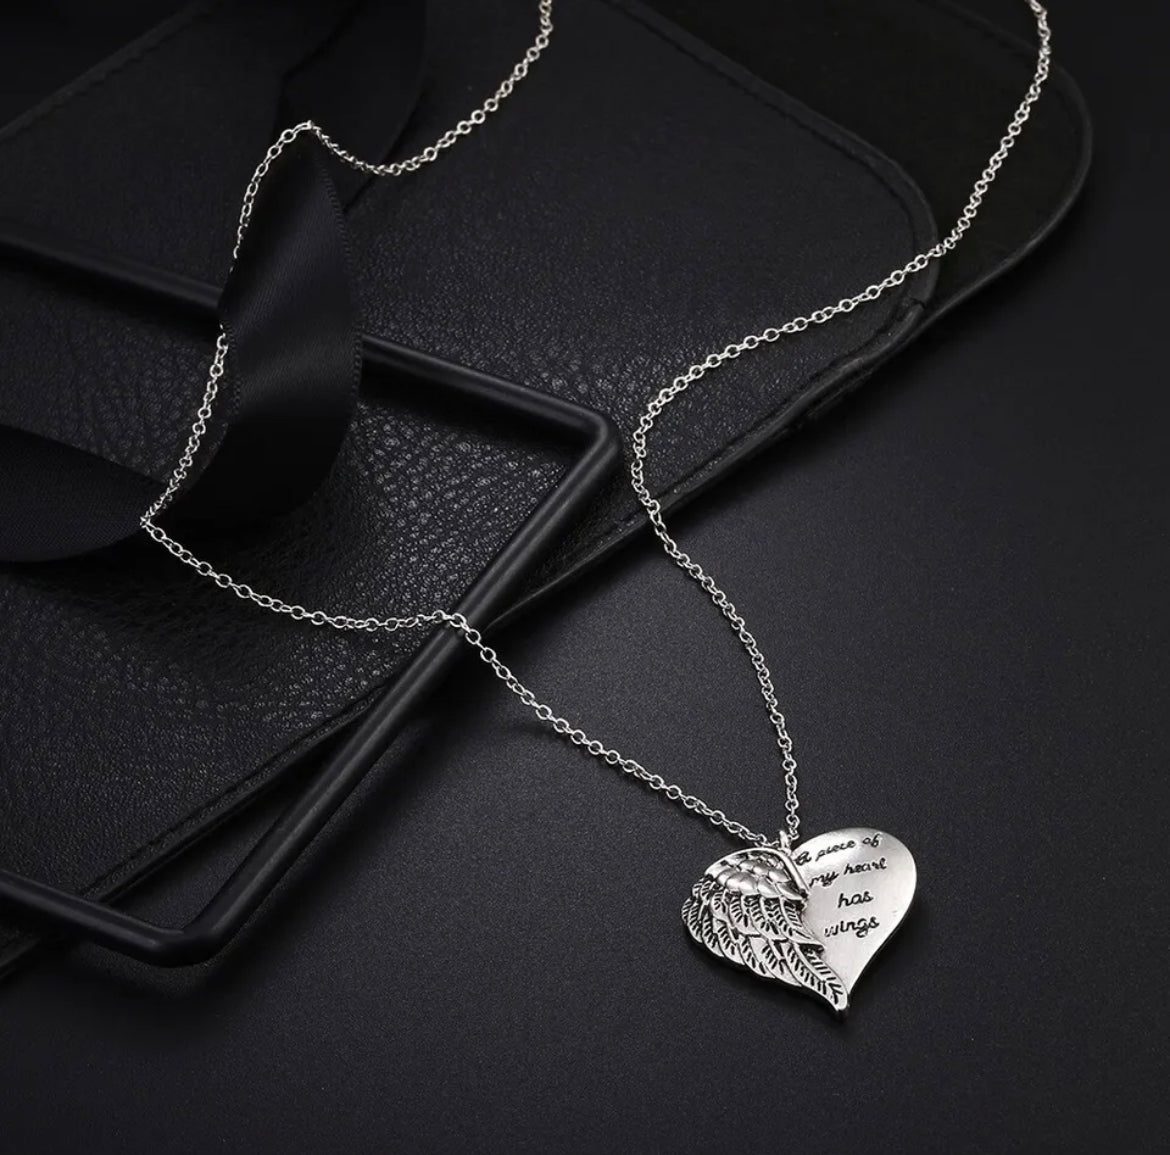 A Piece Of My Heart Has Wings Necklace